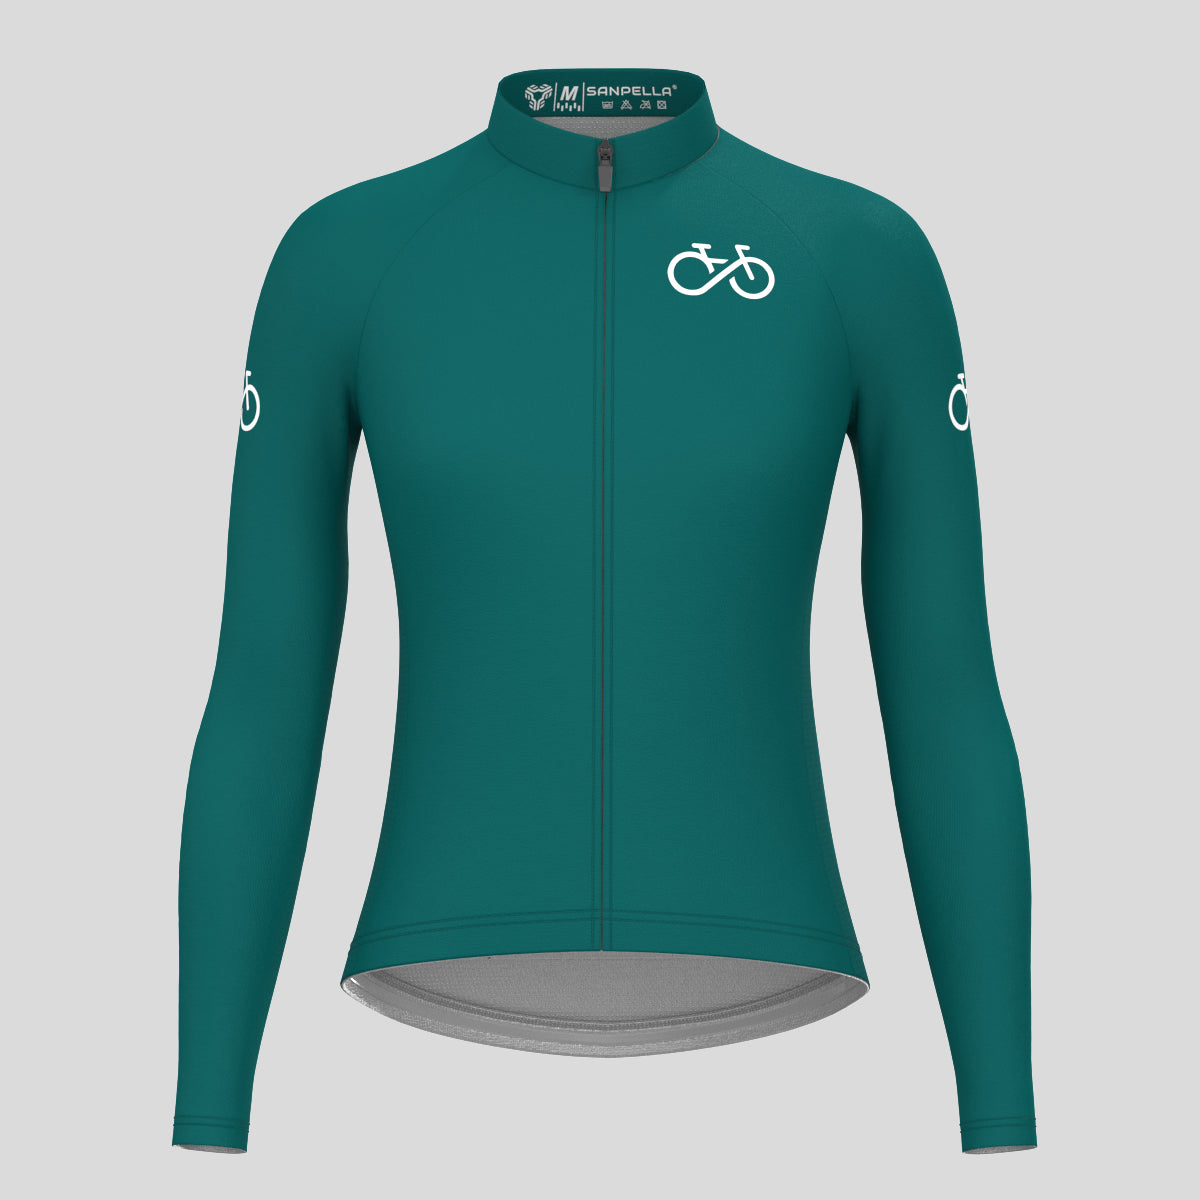 Ride Forever Women's LS Cycling Jersey - Midnight